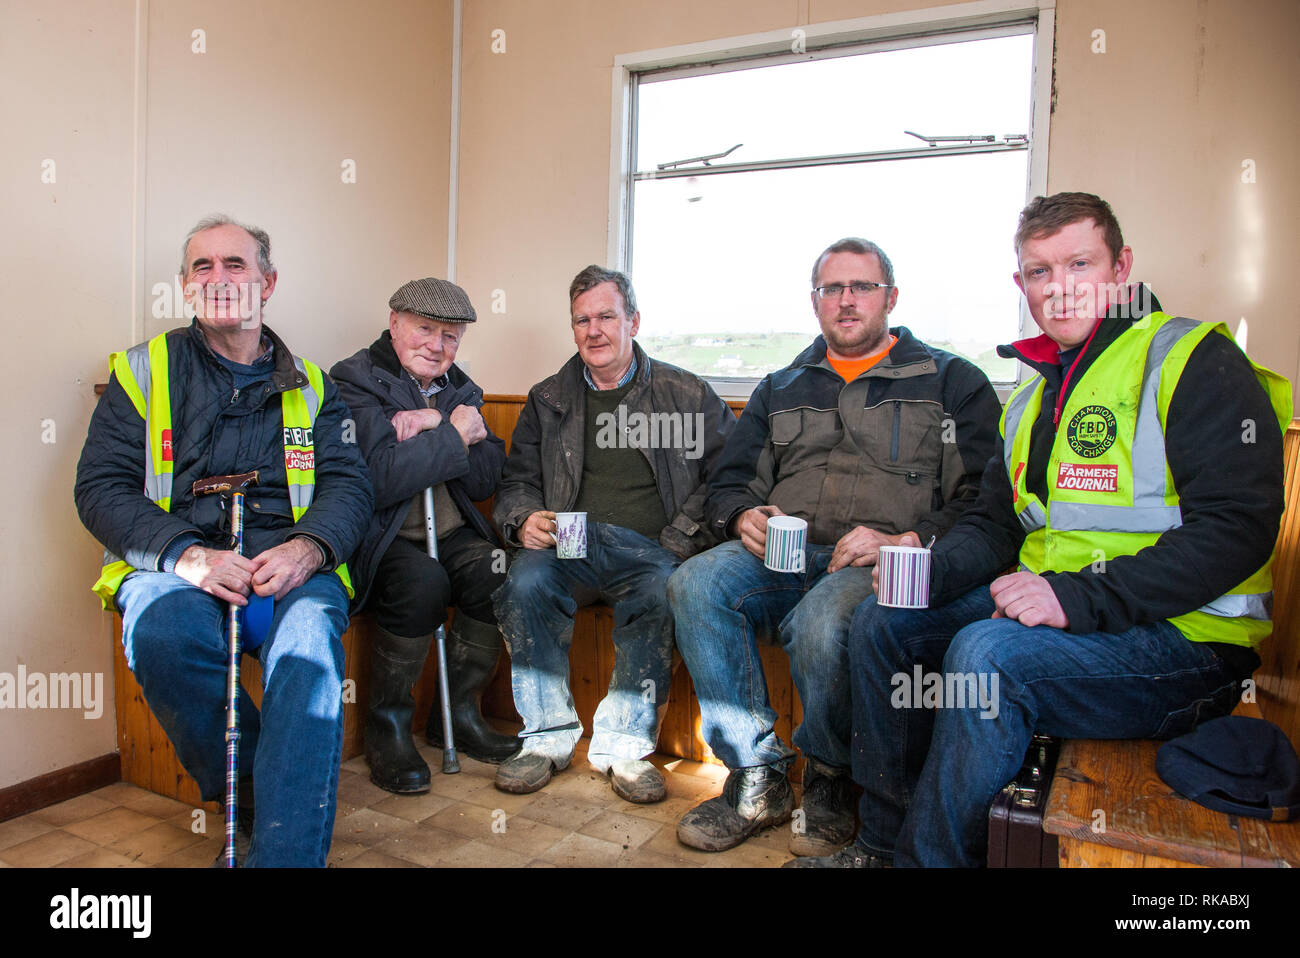 Timogeague, Cork, Ireland. 10th Feb, 2019. Michael Crowley, John Sexton, Michael Walsh, Leslie Wolfe and Thomas Lynch all from Timoleague sit and discuss life events at the West Cork Ploughing Association match that was held in Timoleague, Co. Cork, Ireland Credit: David Creedon/Alamy Live News Stock Photo